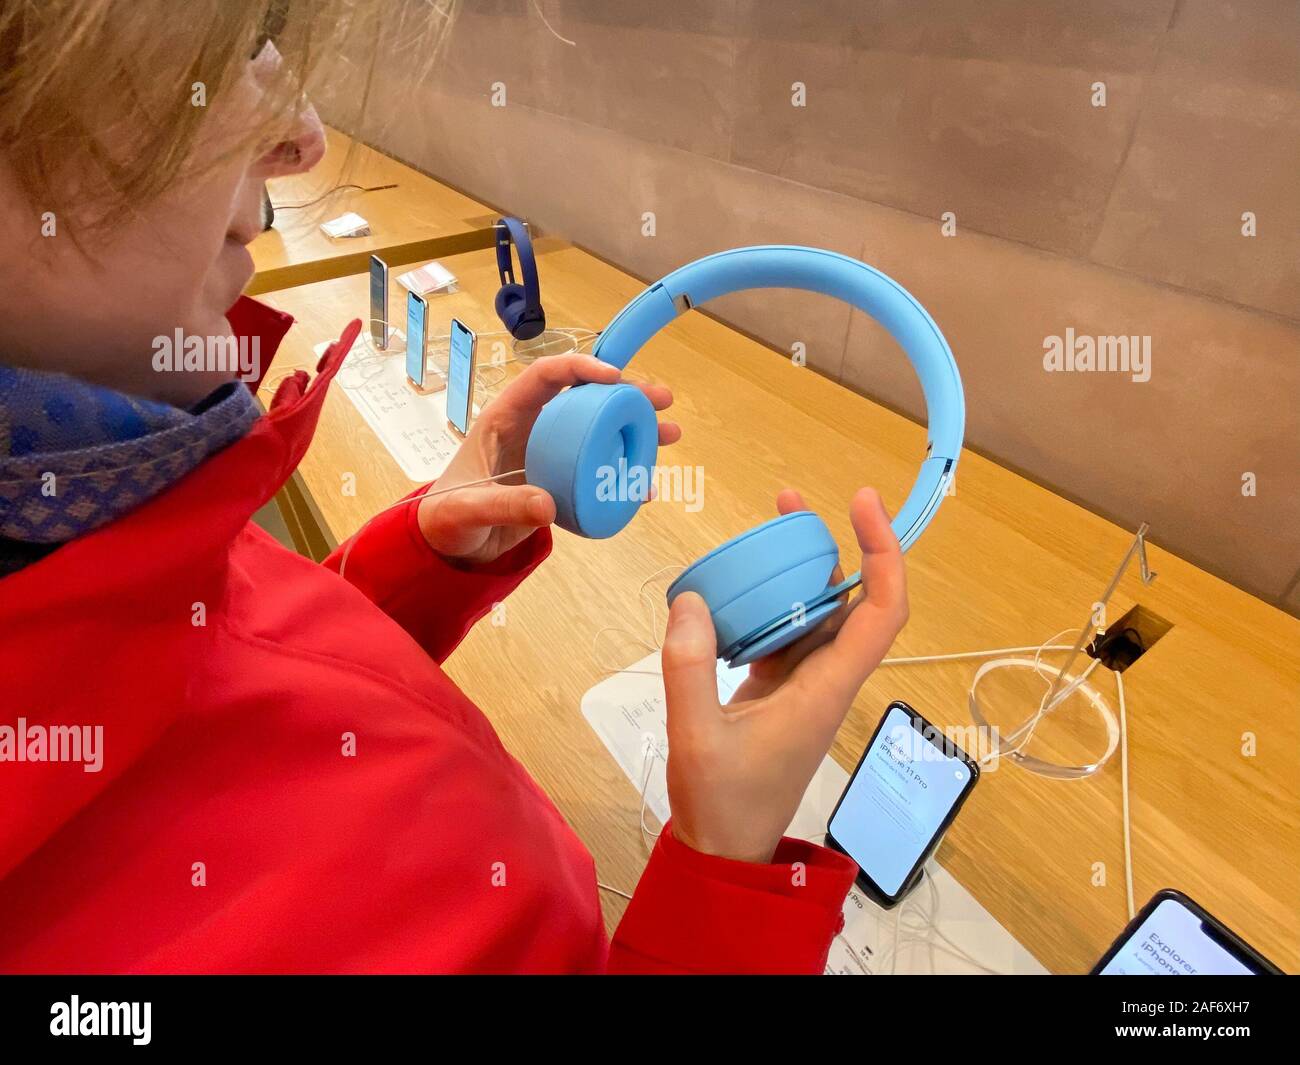 Paris, France - Nov 02, 2019: Woman in red coat inside Apple Computers Store testing the new latest Beats by Dr Dre Solo Pro Active Noise Cancelling headphones Stock Photo